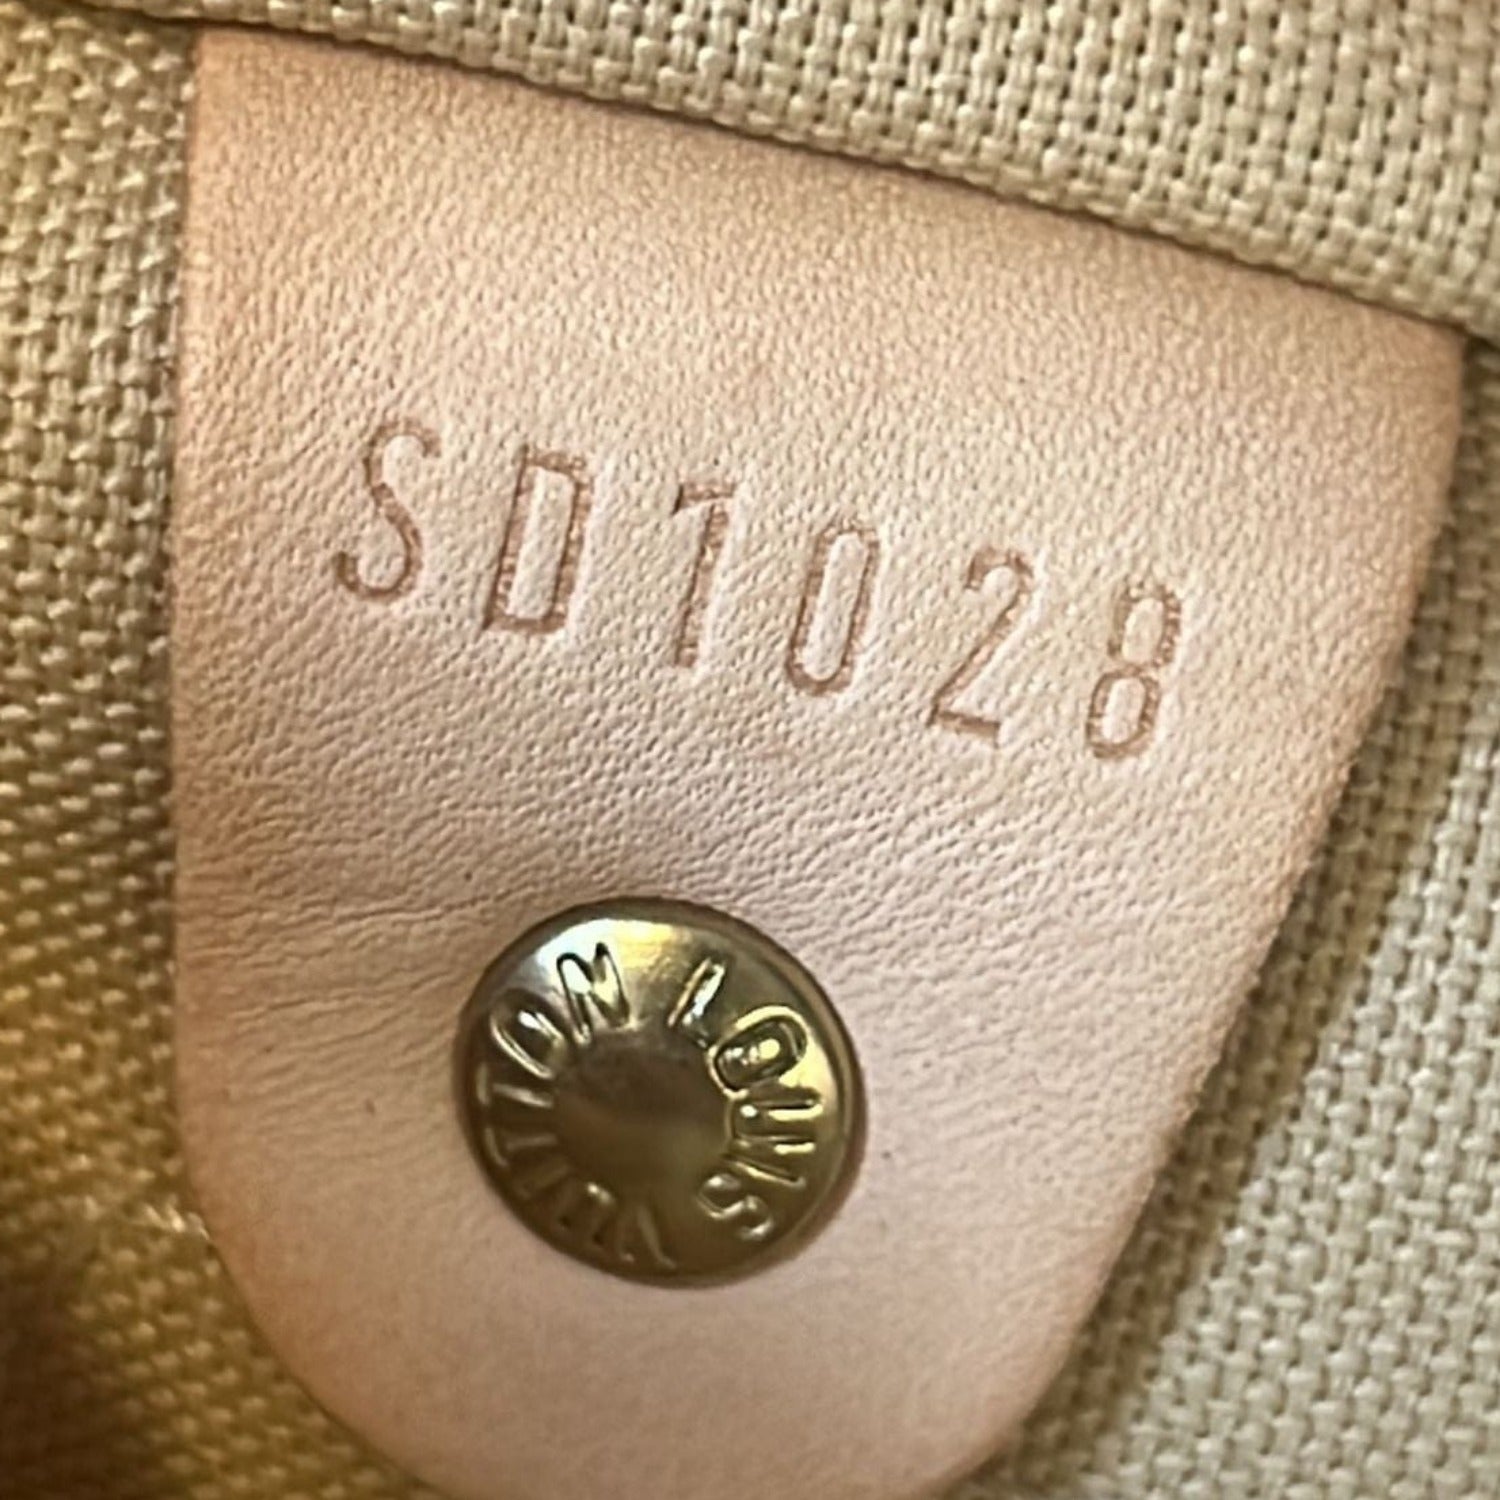 Do 2022 Louis Vuitton Bags Have Date Codes